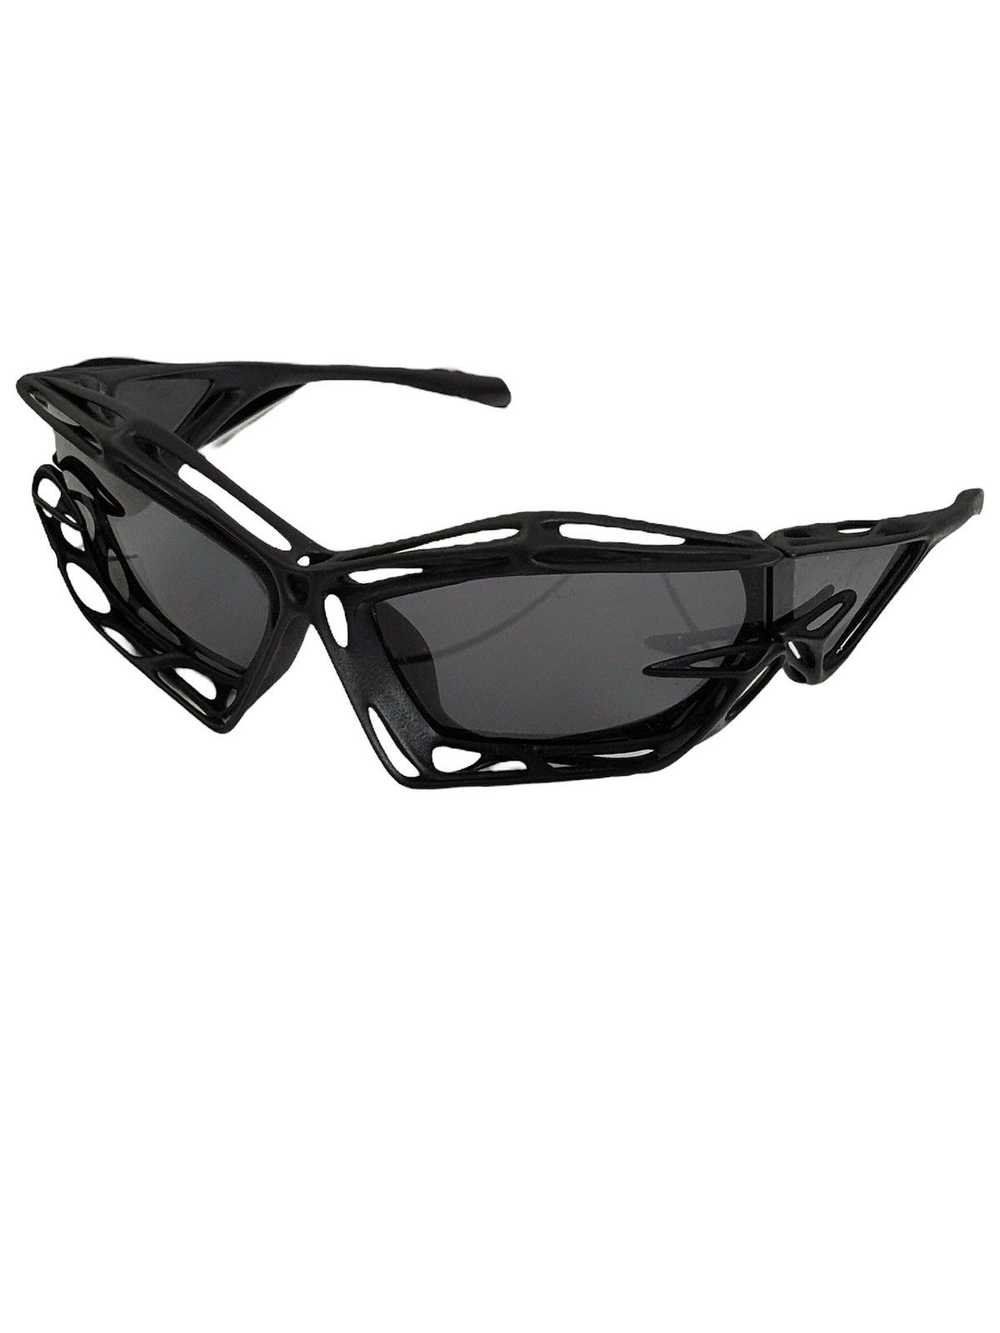 Givenchy 3D Print Cut Cage Sunglasses - image 1